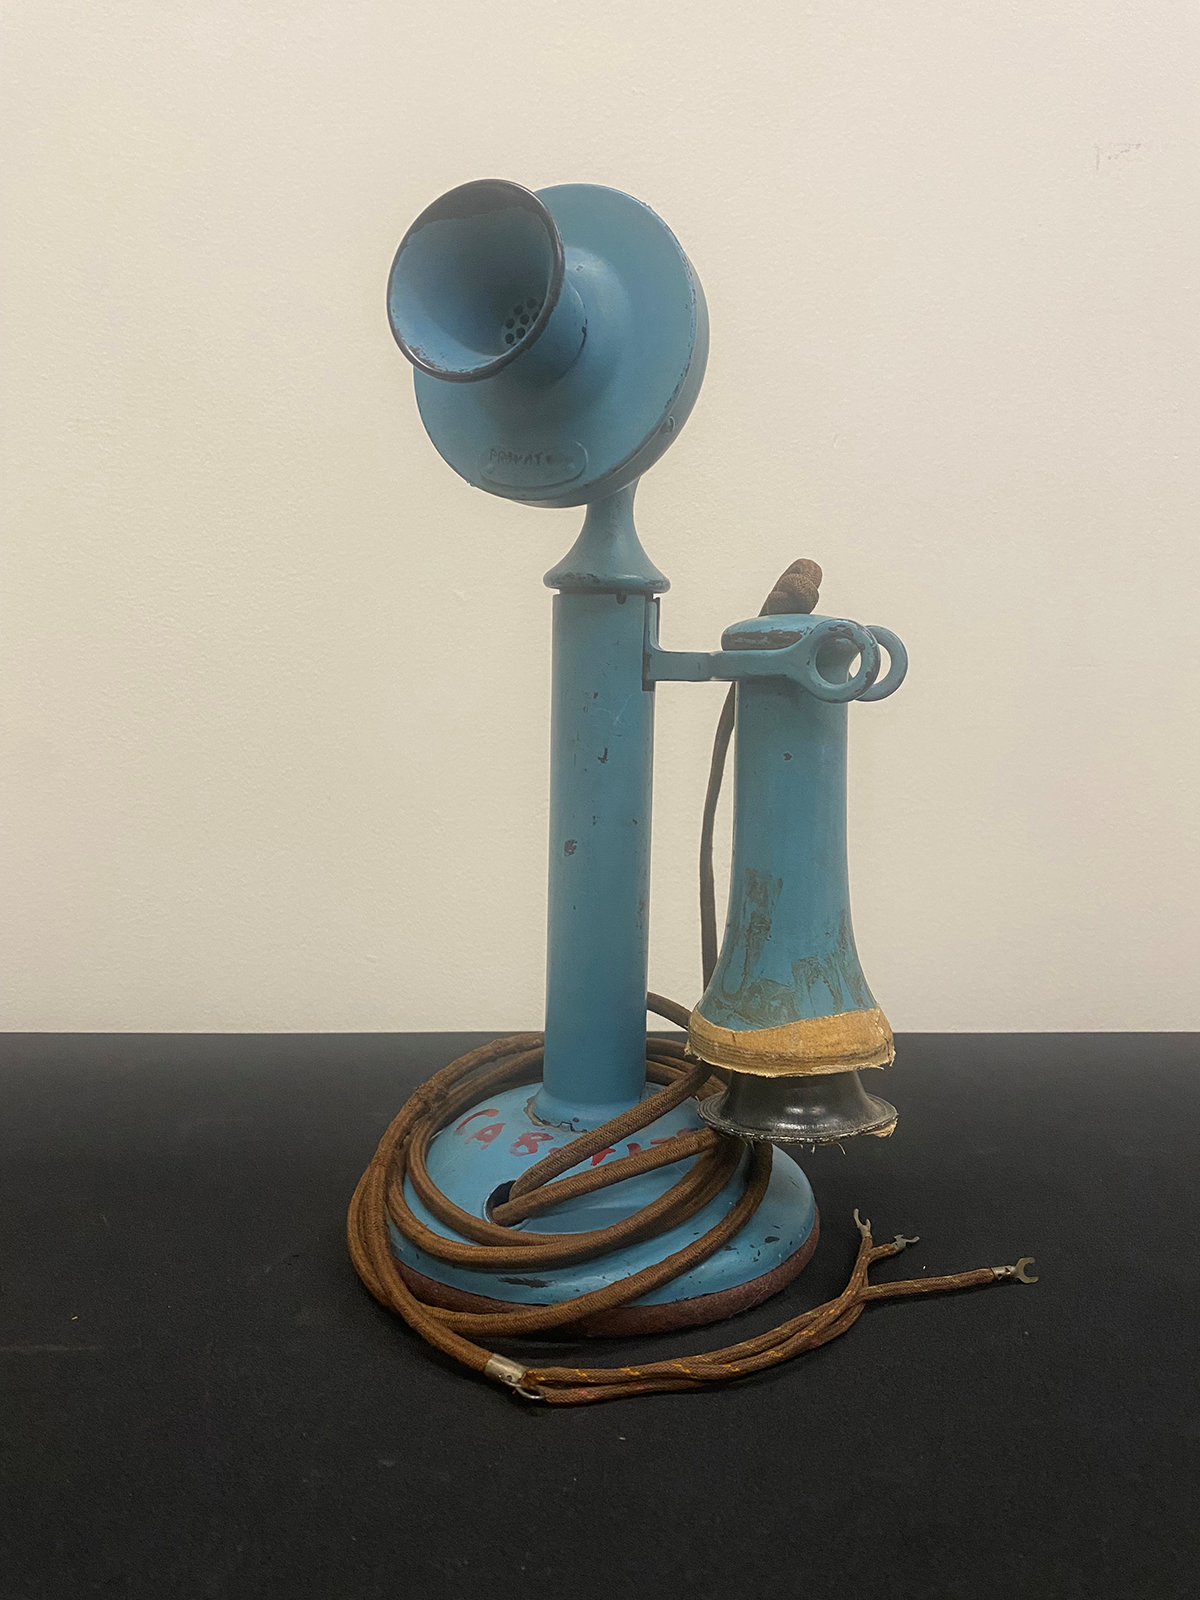 Color photograph of blue, old-fashioned candlestick style telephone